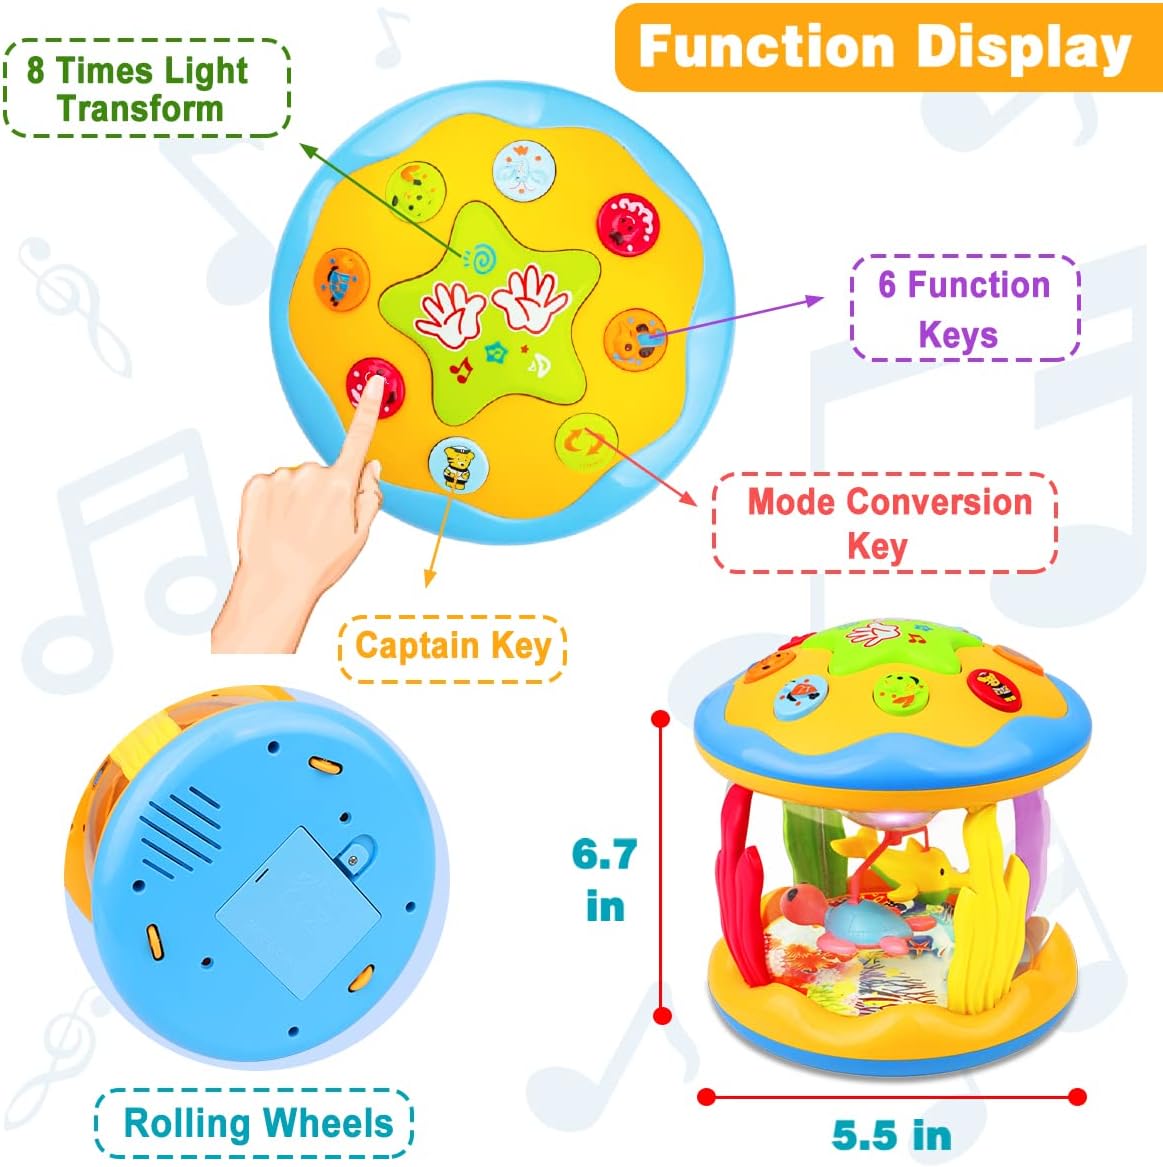 Aboosam Baby Toys 6 to 12 Months - Musical Learning Infant Toys 12-18 Months - Babies Ocean Rotating Light Up Toys for Toddlers 1 2 3+ Years Old Boys Girls Baby Gifts